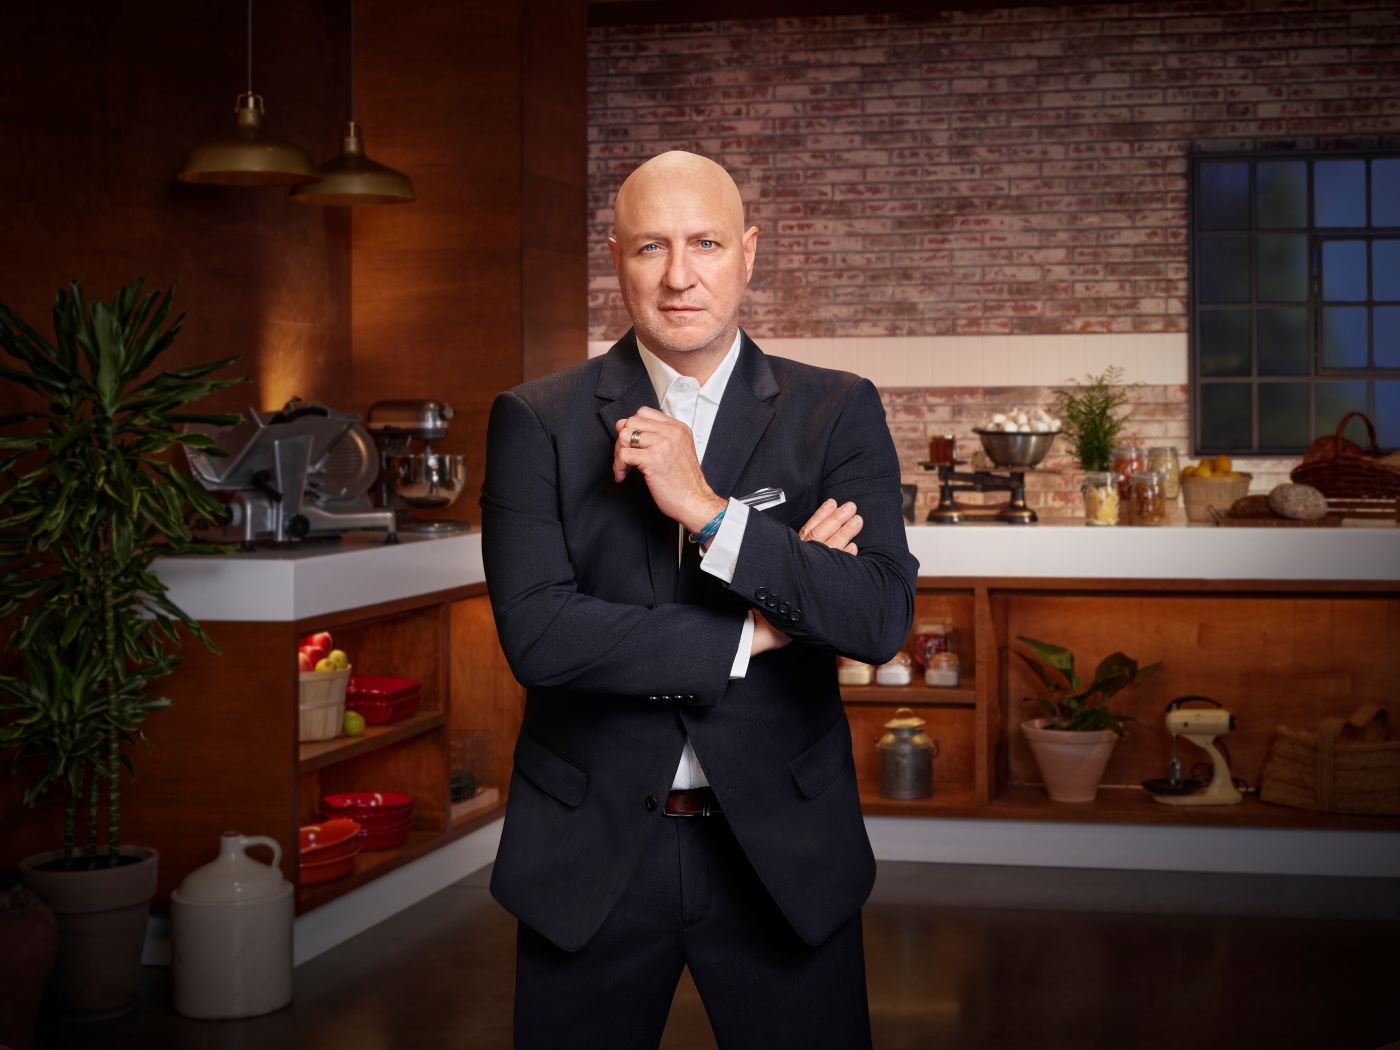 Tom Colicchio from Top Chef stands in front of the set surrounded by cookware including mixers, scales, and deli slicers in front of a half light brown brick wall and a wood wall. He is wearing a black suit with a white button-up shirt.